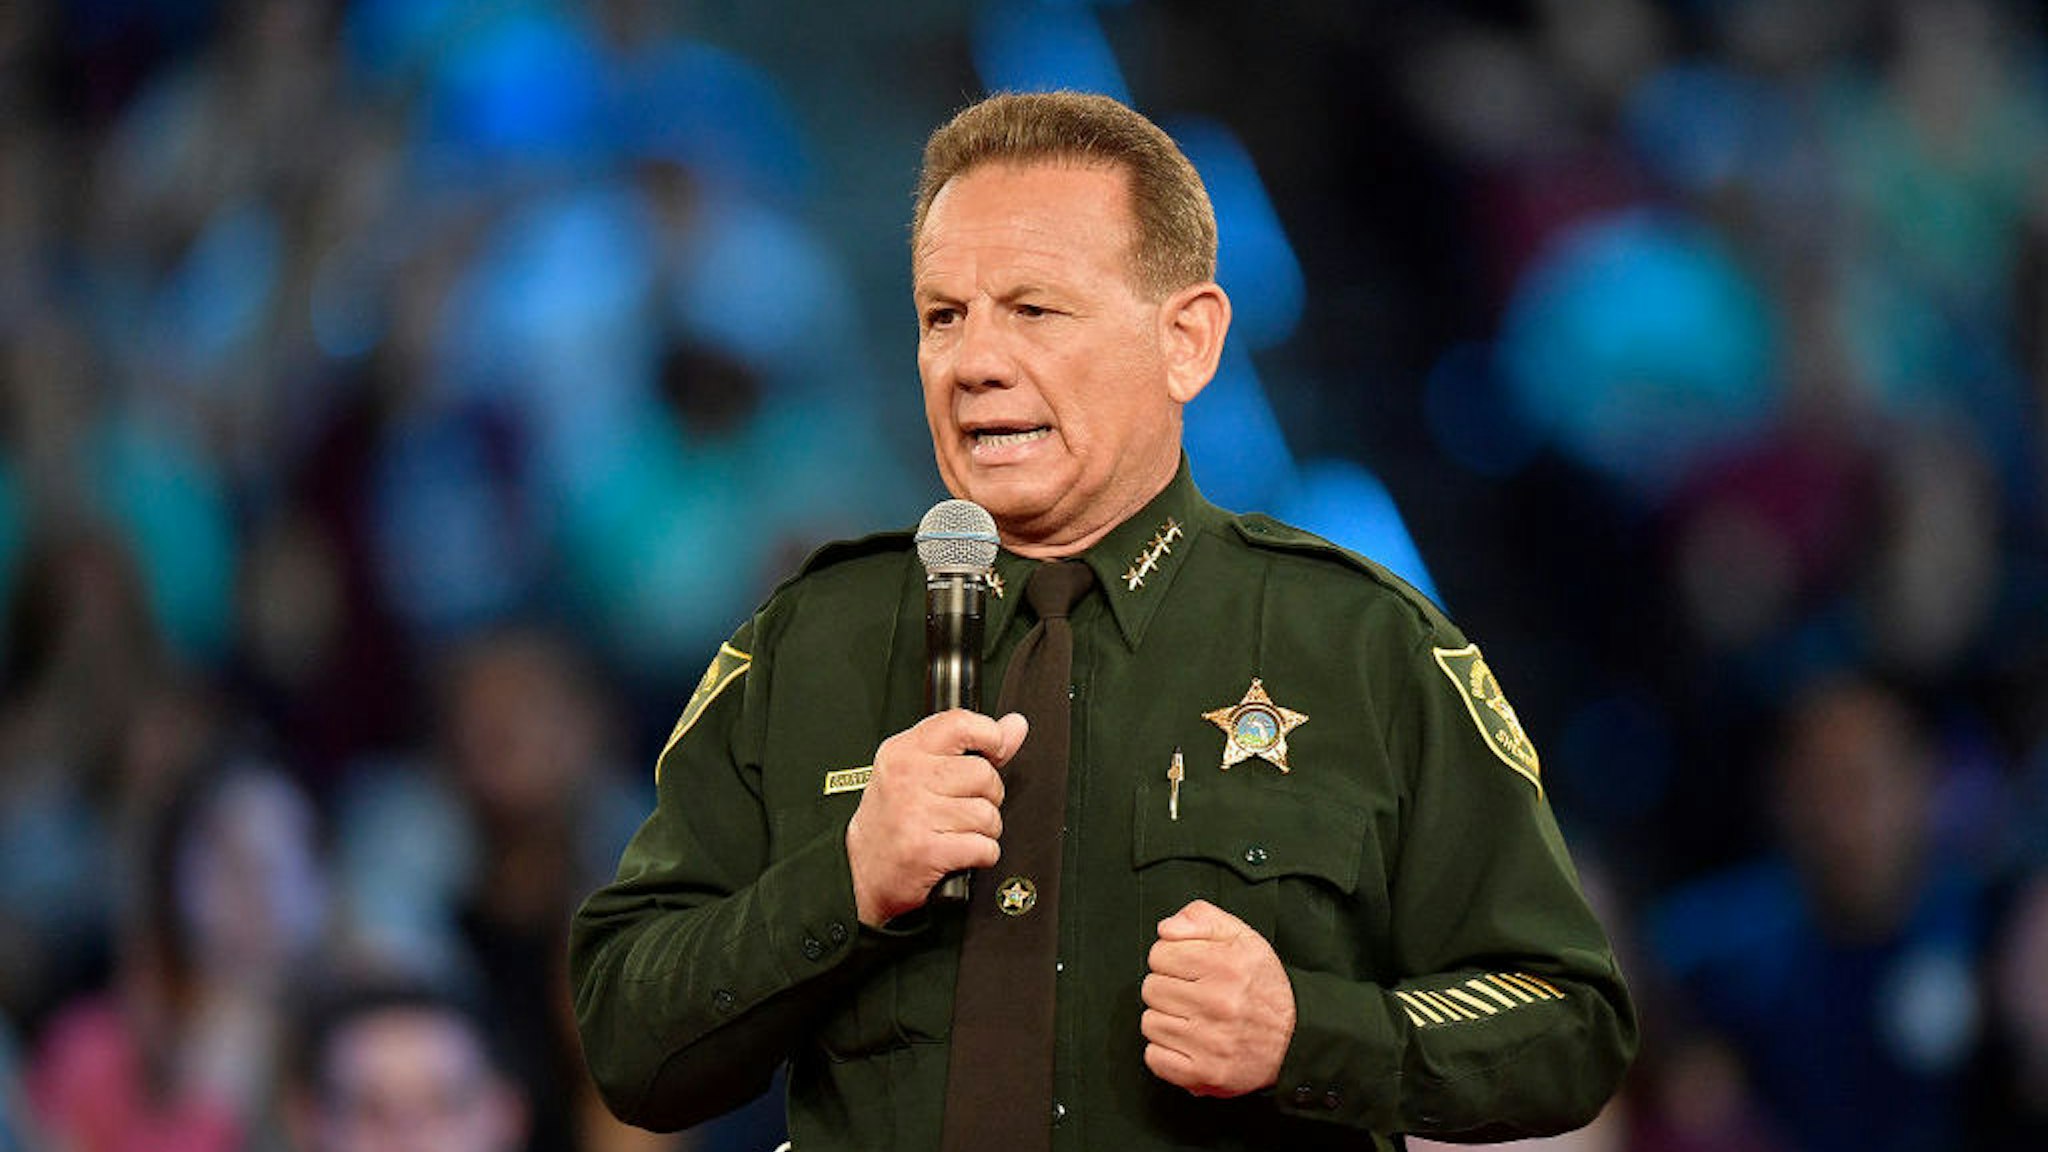 Broward County Sheriff Scott Israel speaks before the start of a CNN town hall meeting on February 21, 2018, at the BB&amp;T Center, in Sunrise, Fla. Israel said it made him 'sick to my stomach' when he learned that the school resource officer had not entered Marjory Stoneman Douglas to confront the shooter. (Michael Laughlin/Sun Sentinel/TNS)